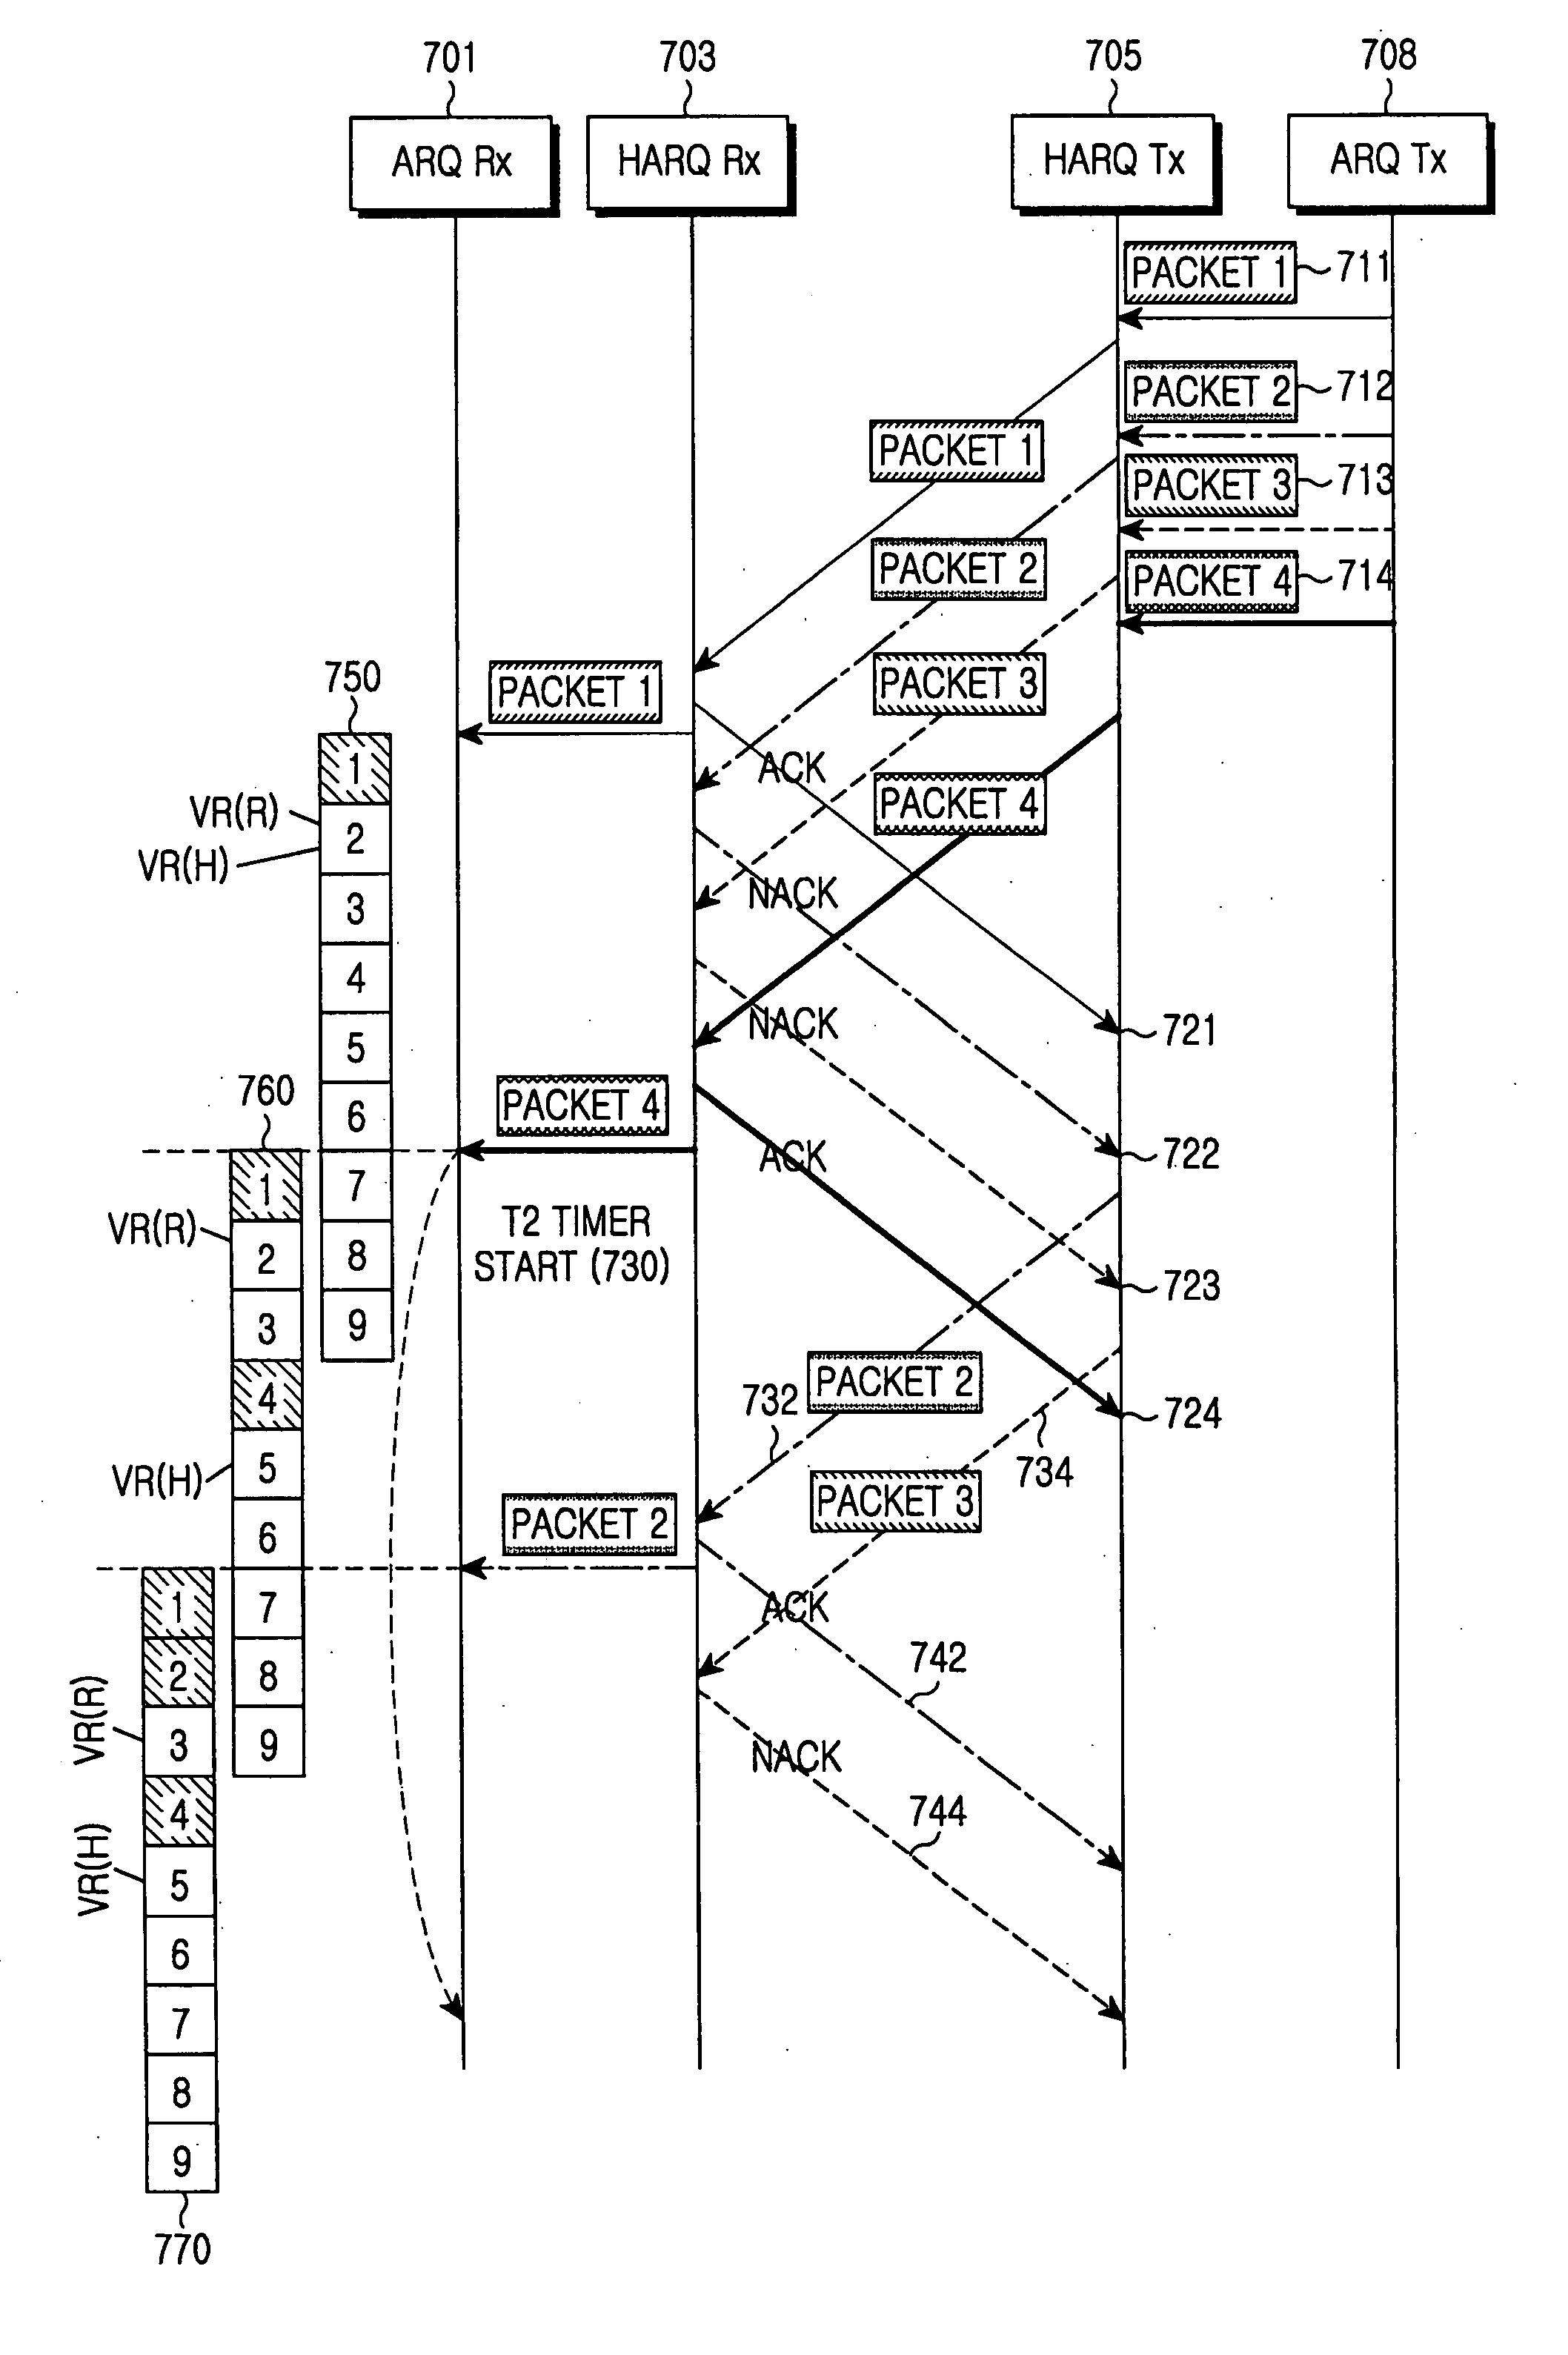 Retransmission apparatus and method for high-speed data processing